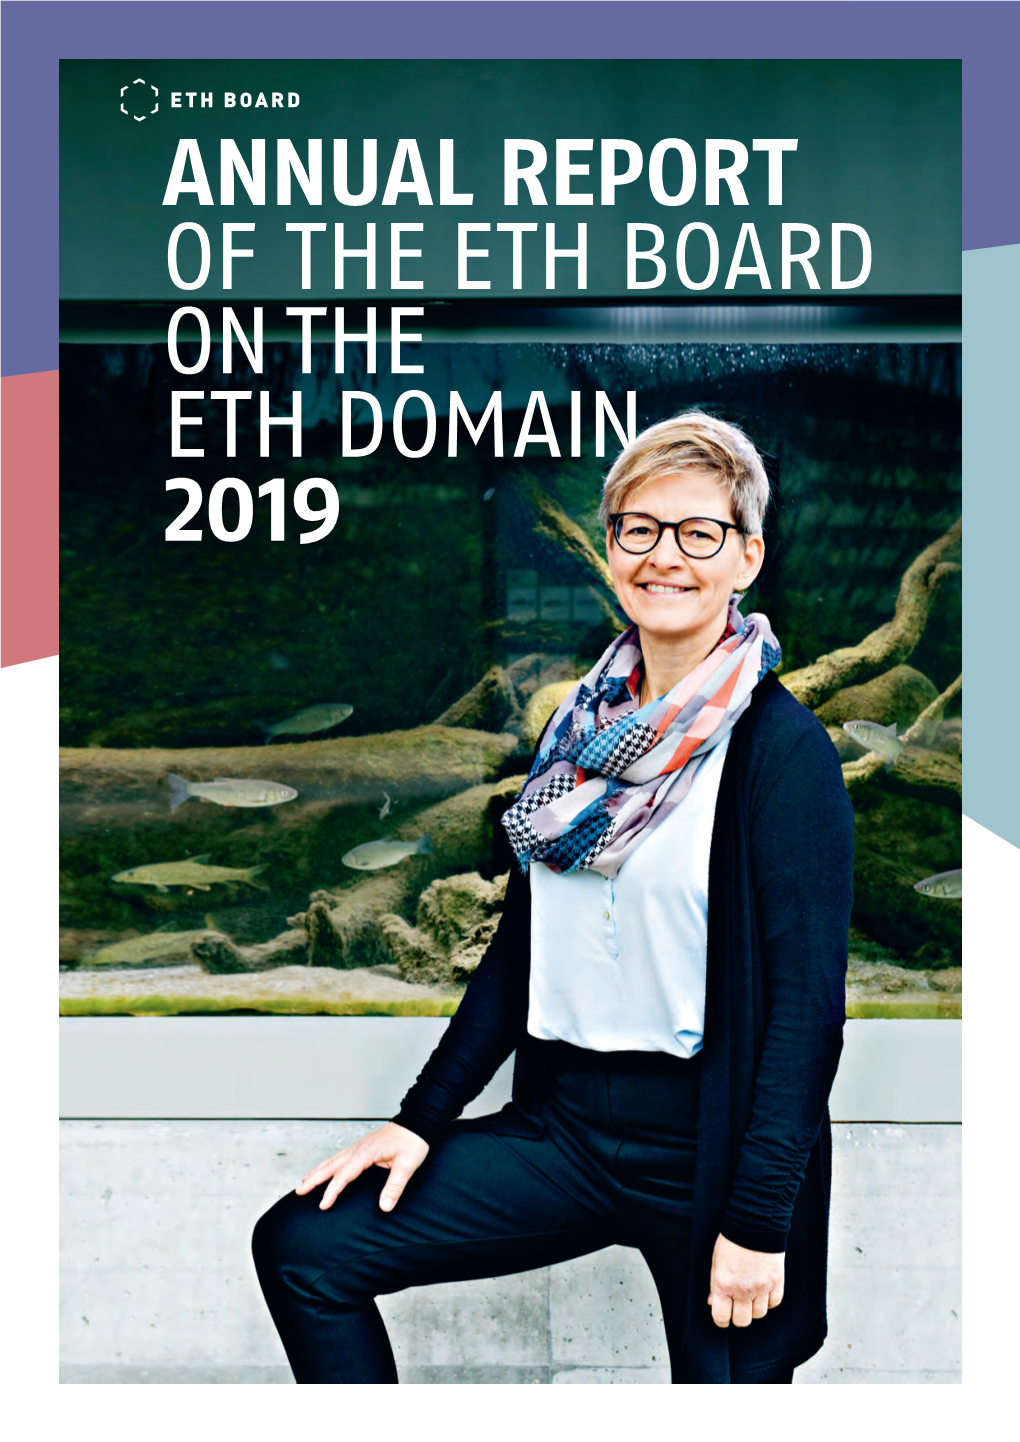 Annual Report of the ETH Board on the ETH Domain 2019